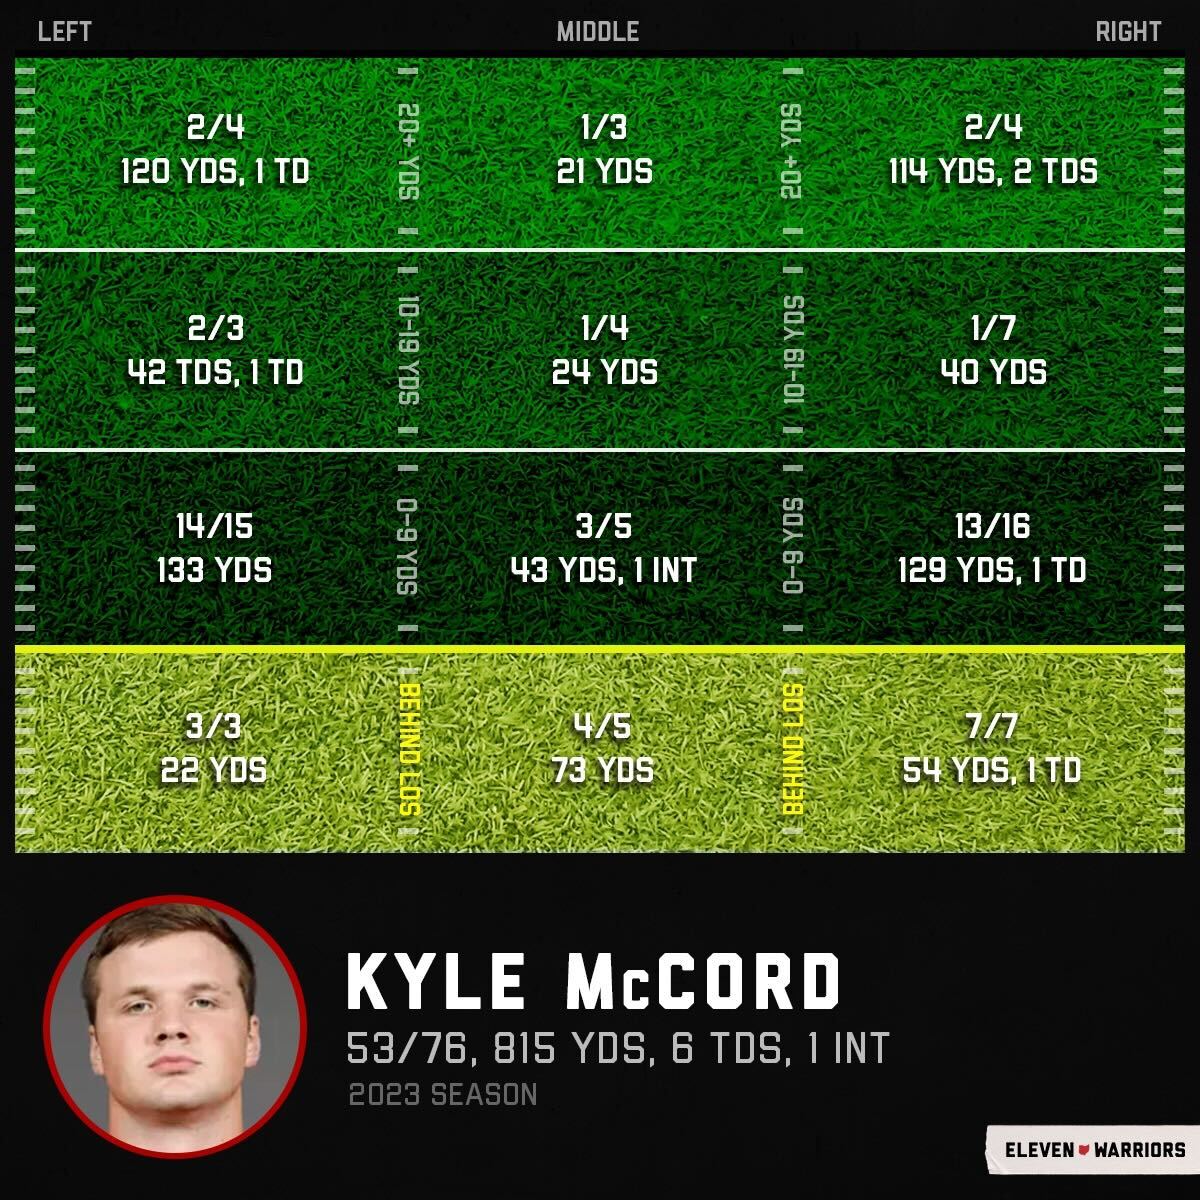 Kyle McCord's passing chart through the first three games of the 2023 season